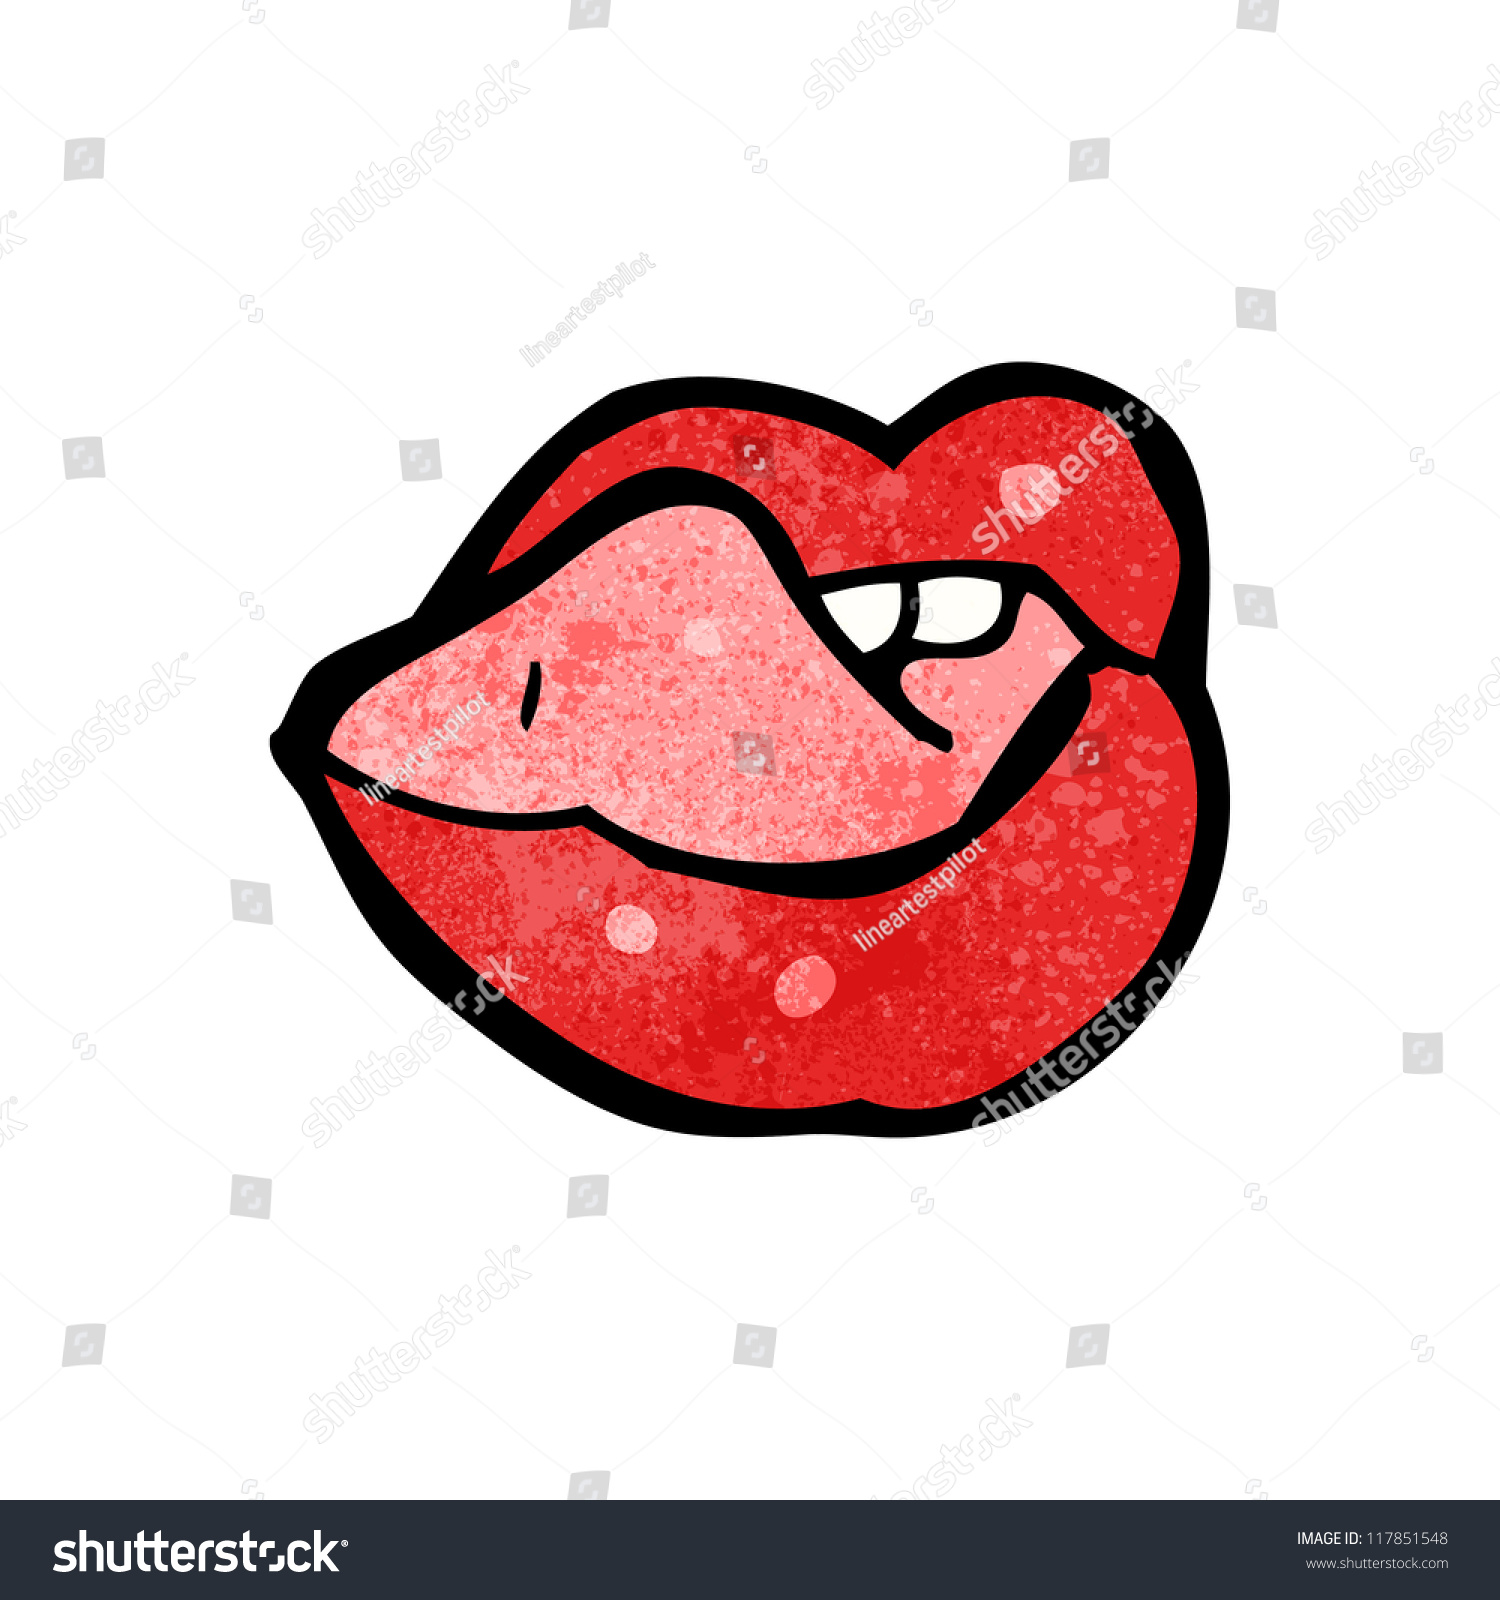 clipart licking lips - photo #12